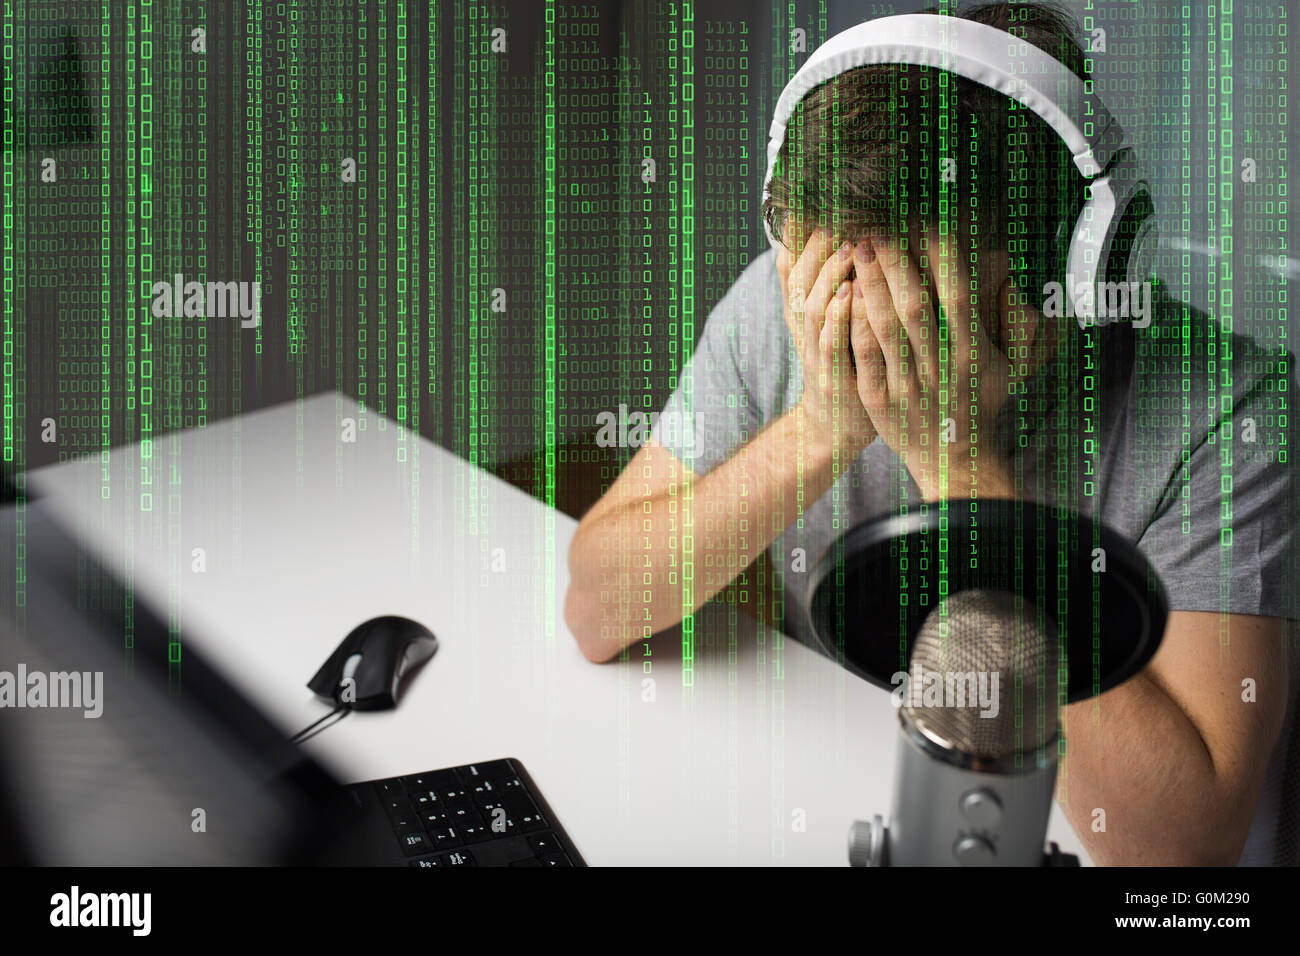 close up of man losing computer video game Stock Photo